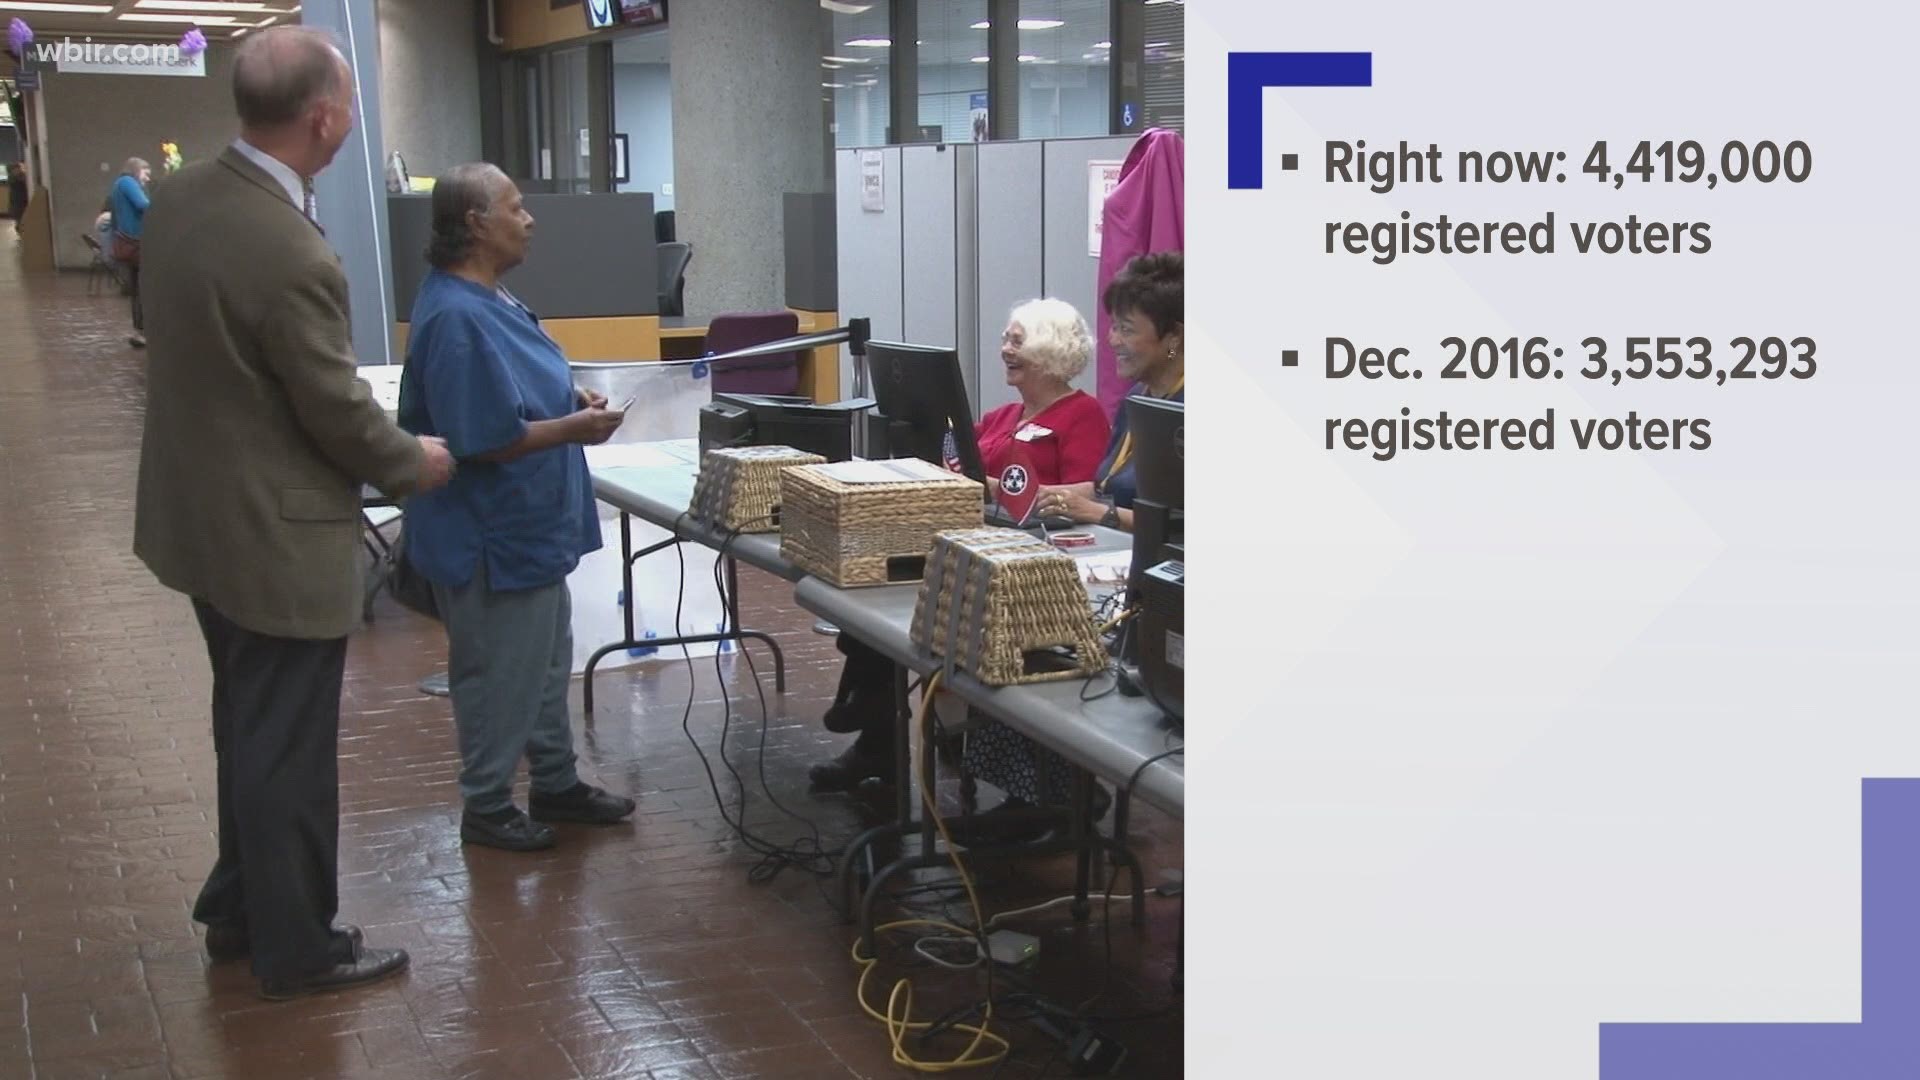 Officials said that a record number of people have registered to vote in the 2020 presidential election.